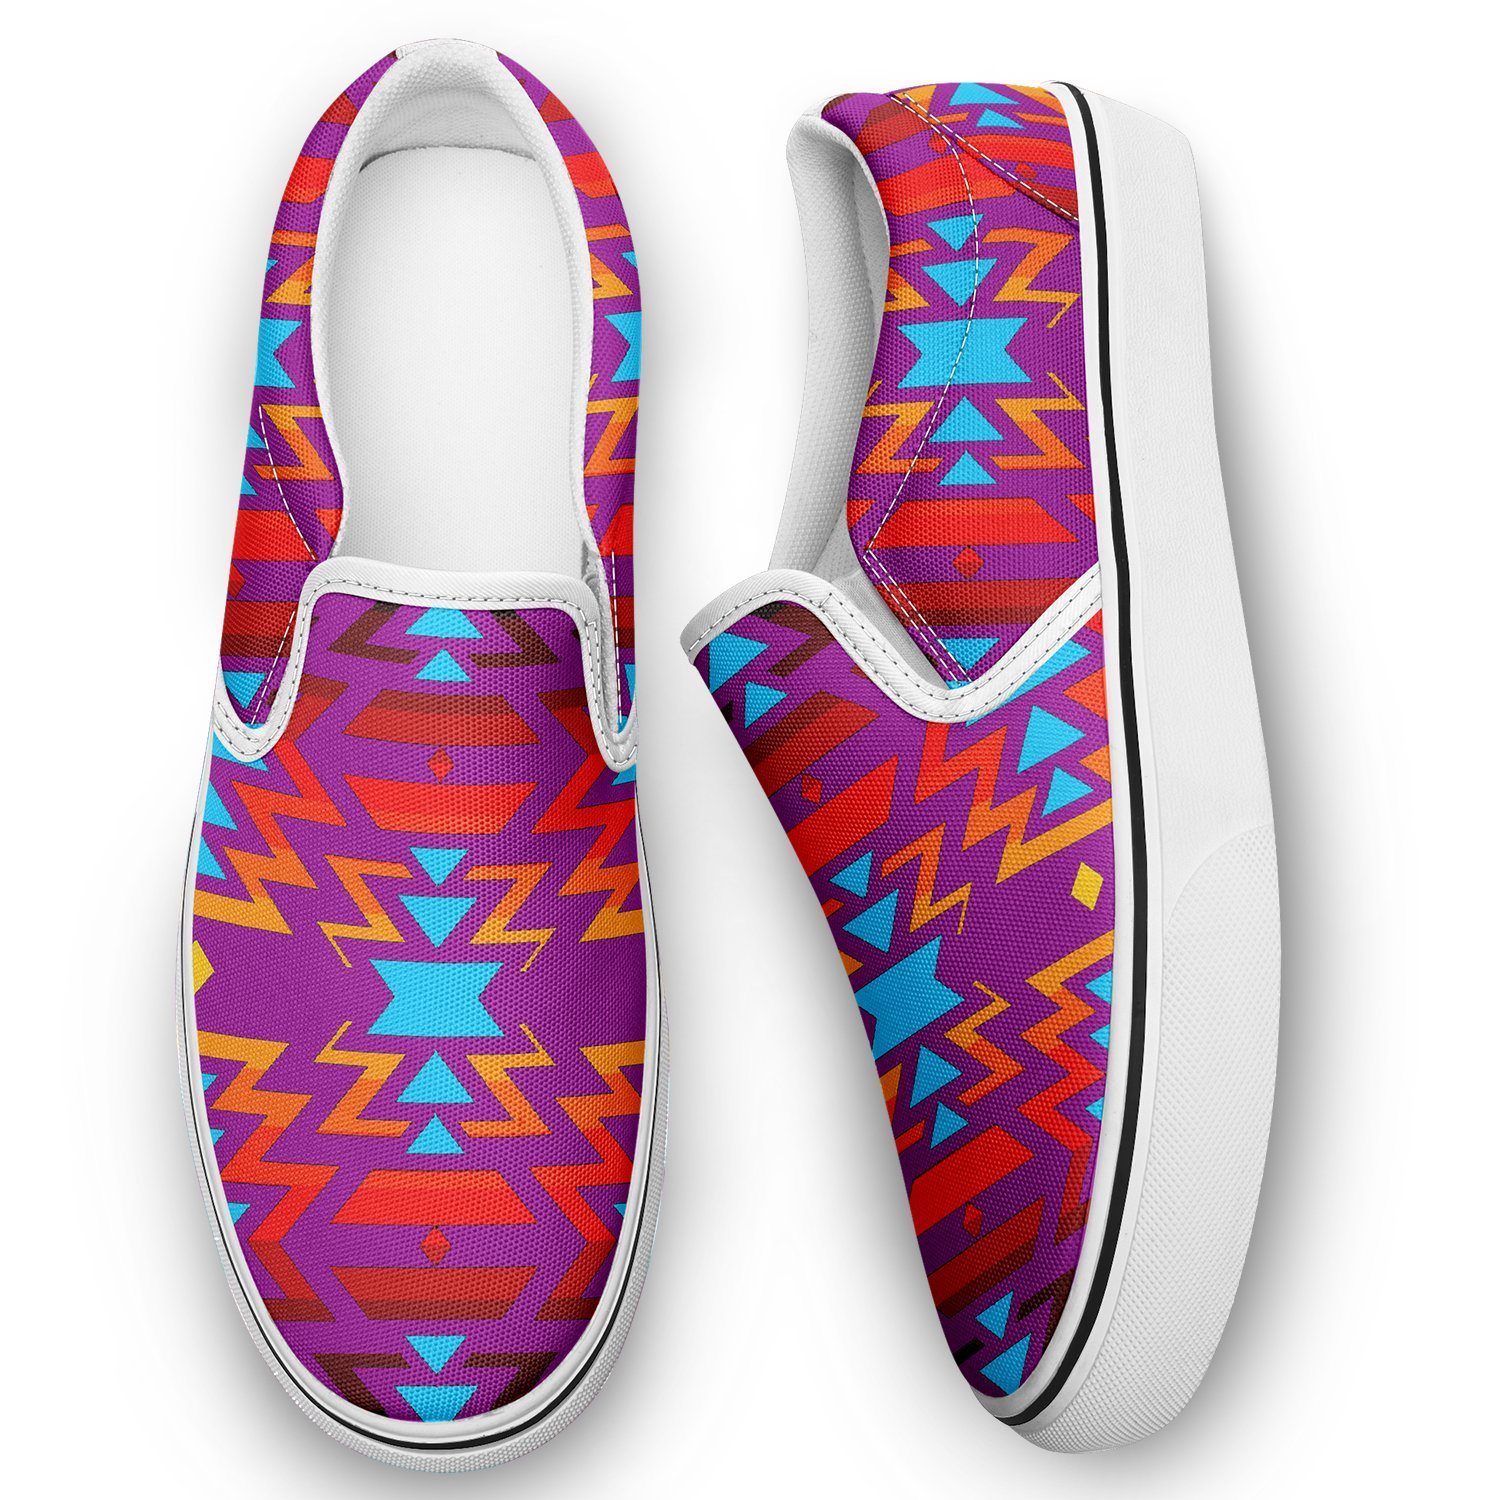 Fire Colors and Turquoise Purple Otoyimm Kid's Canvas Slip On Shoes 49 Dzine 